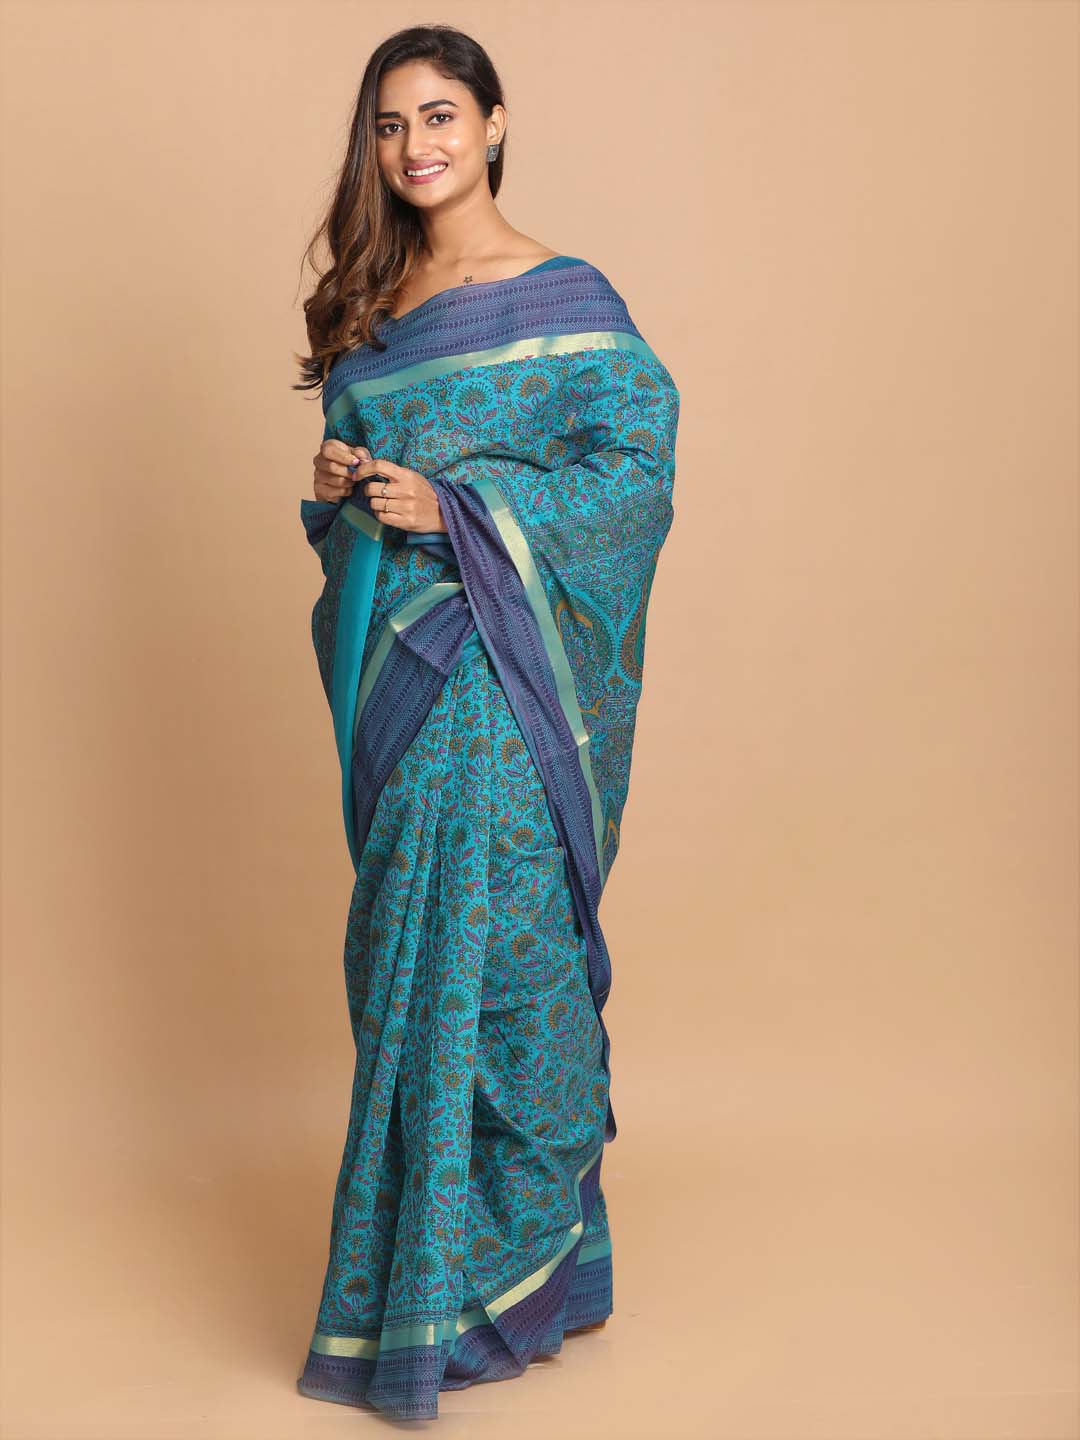 Indethnic Printed Cotton Blend Saree in Turquoise Blue - View 2